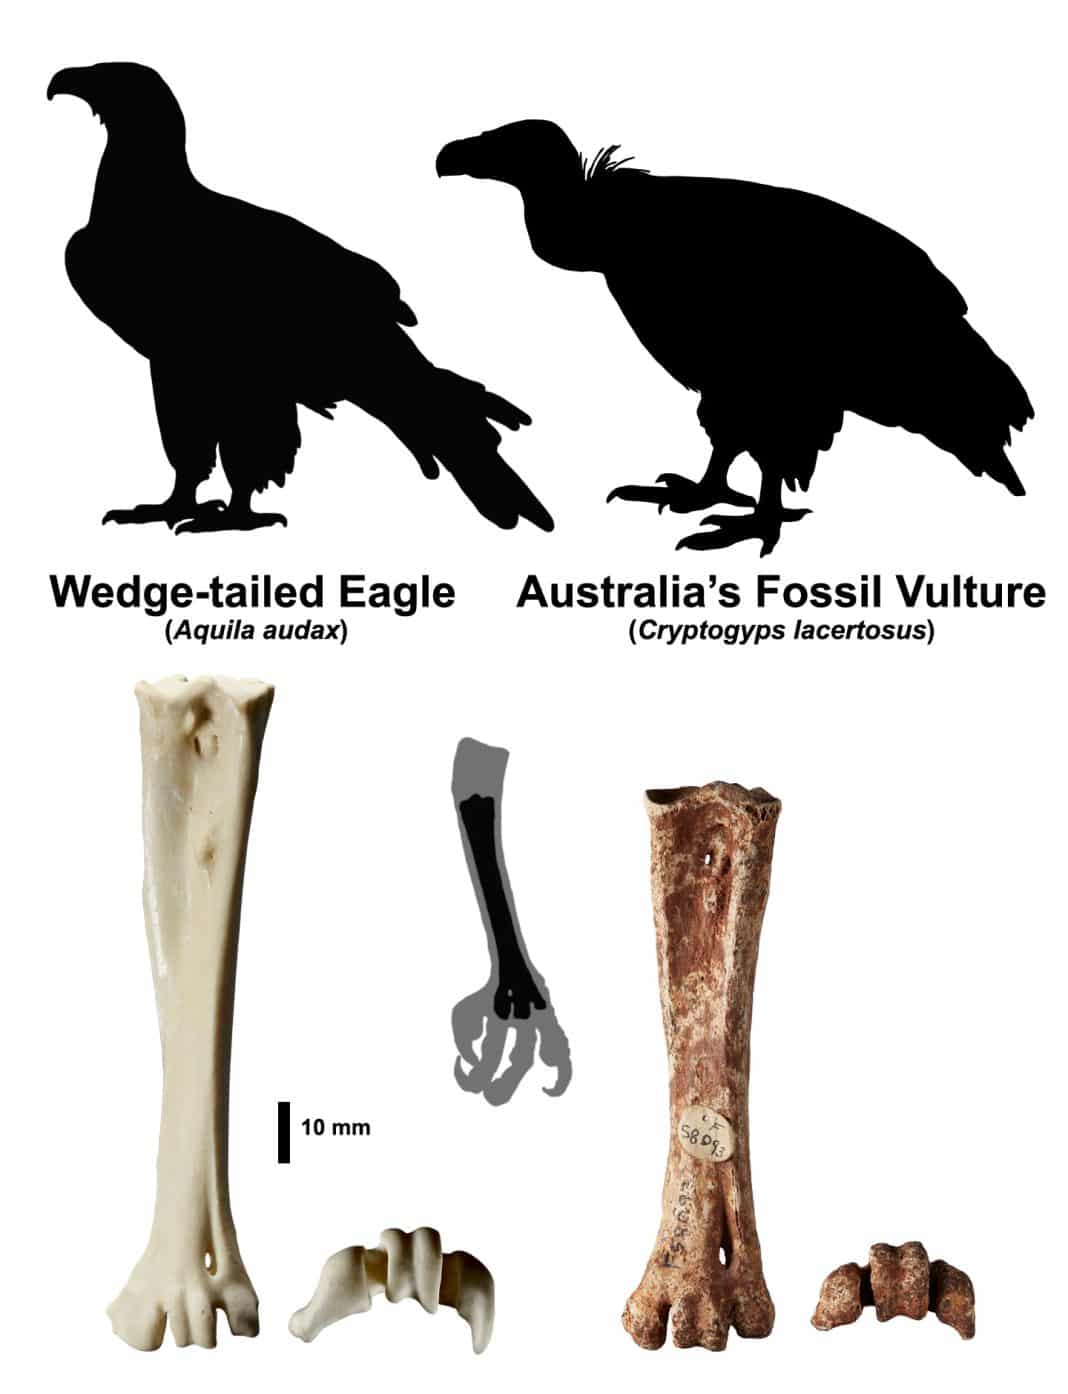 Diagram showing size comparison between wedge-tailed eagle and fossil vulture